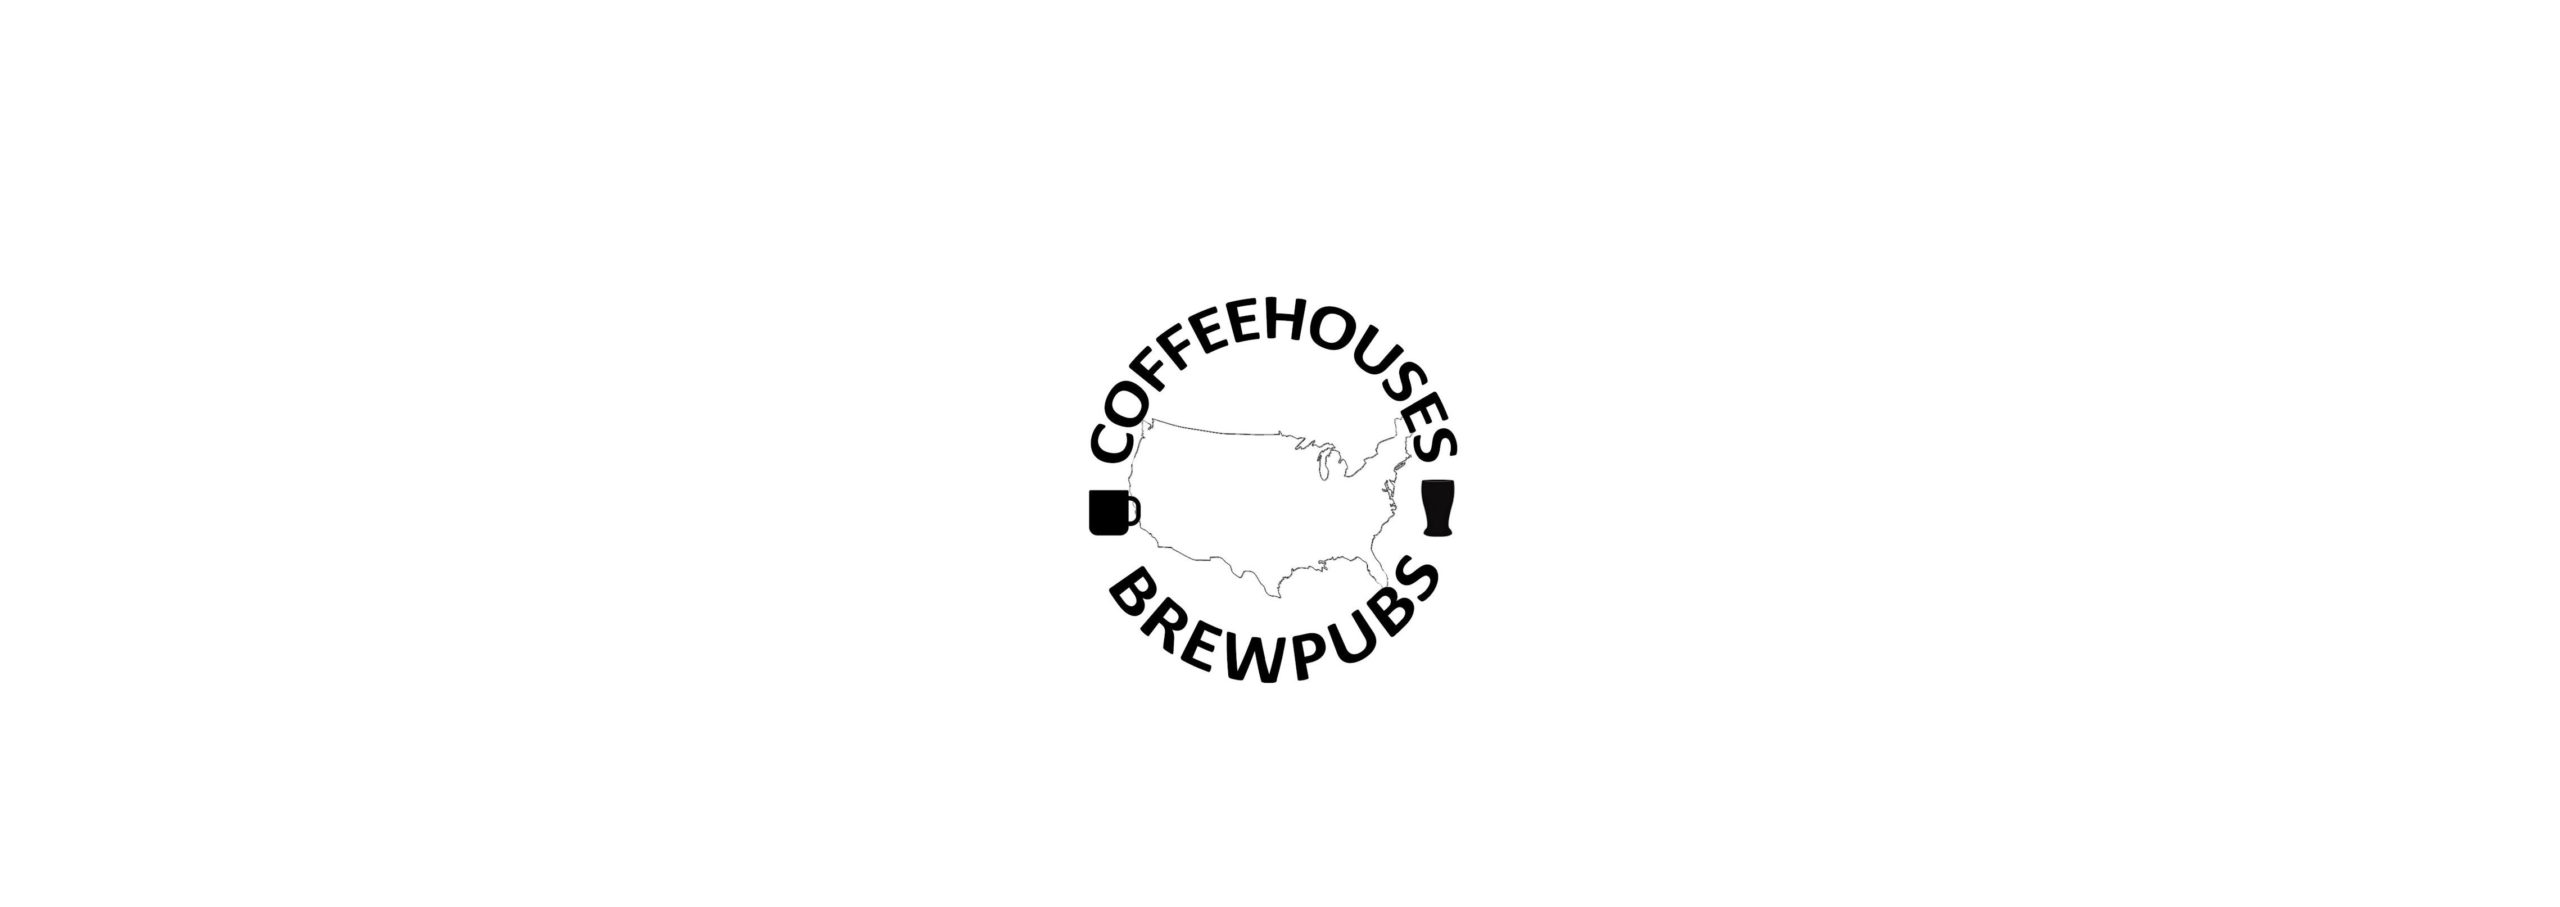 COFFEEHOUSES AND BREWPUBS AROUND THE WORLD